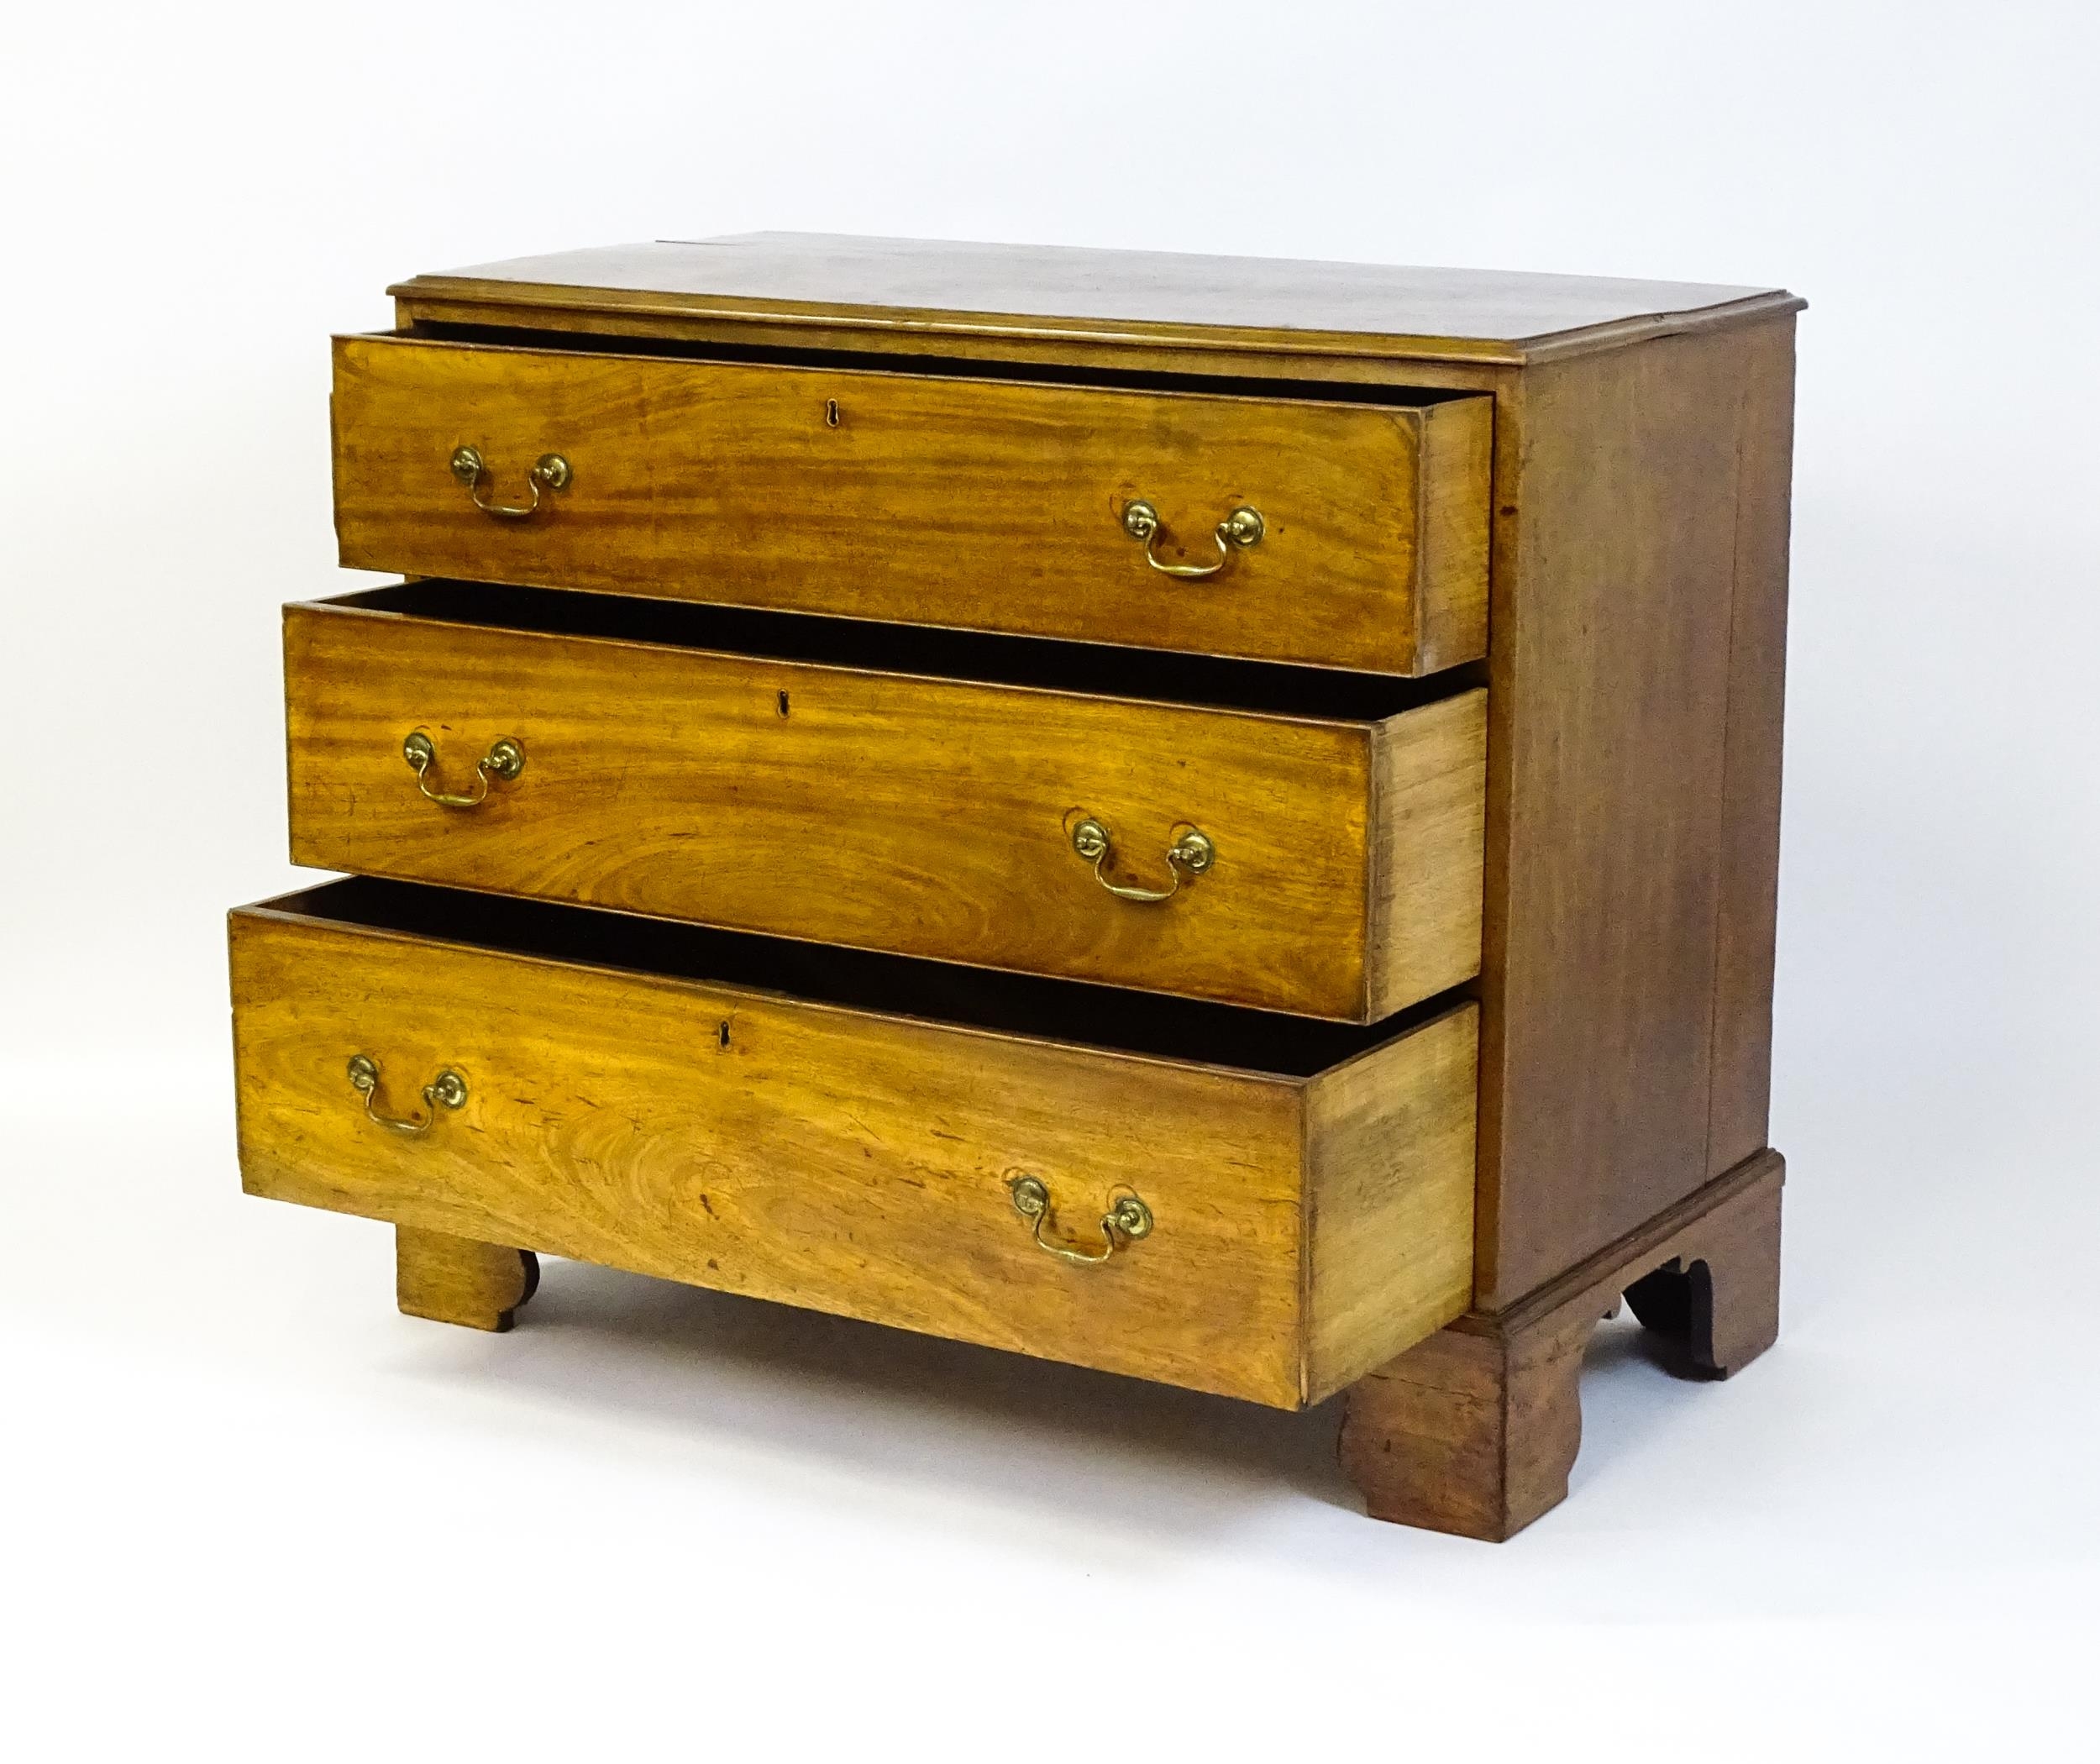 A late Georgian mahogany chest of drawers with a rectangular moulded top above three long drawers - Image 7 of 10